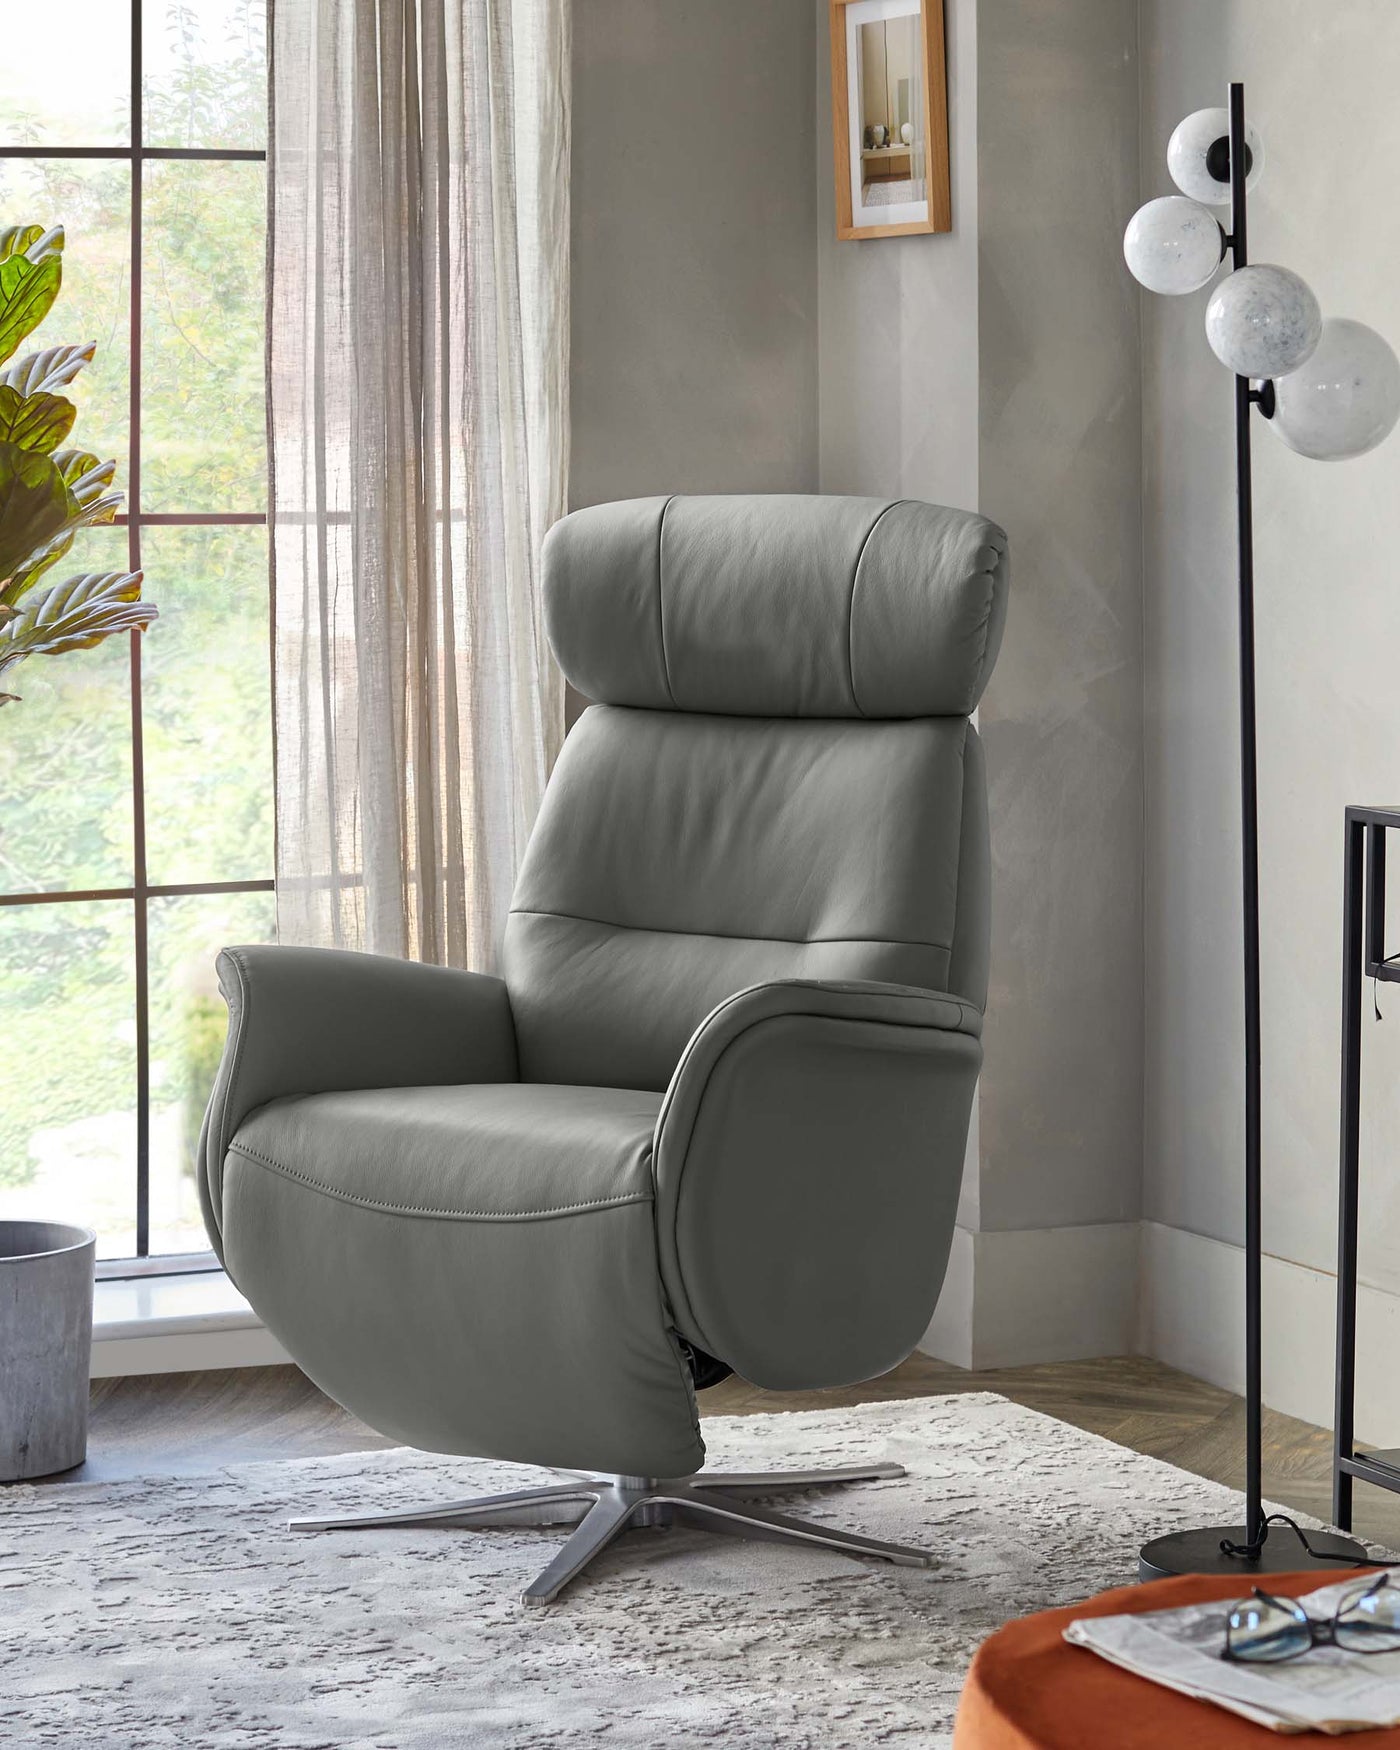 Modern grey leather recliner chair with a sleek design featuring a tufted backrest, padded arms, and a brushed metal swivel base, set in a stylish living room with natural light.